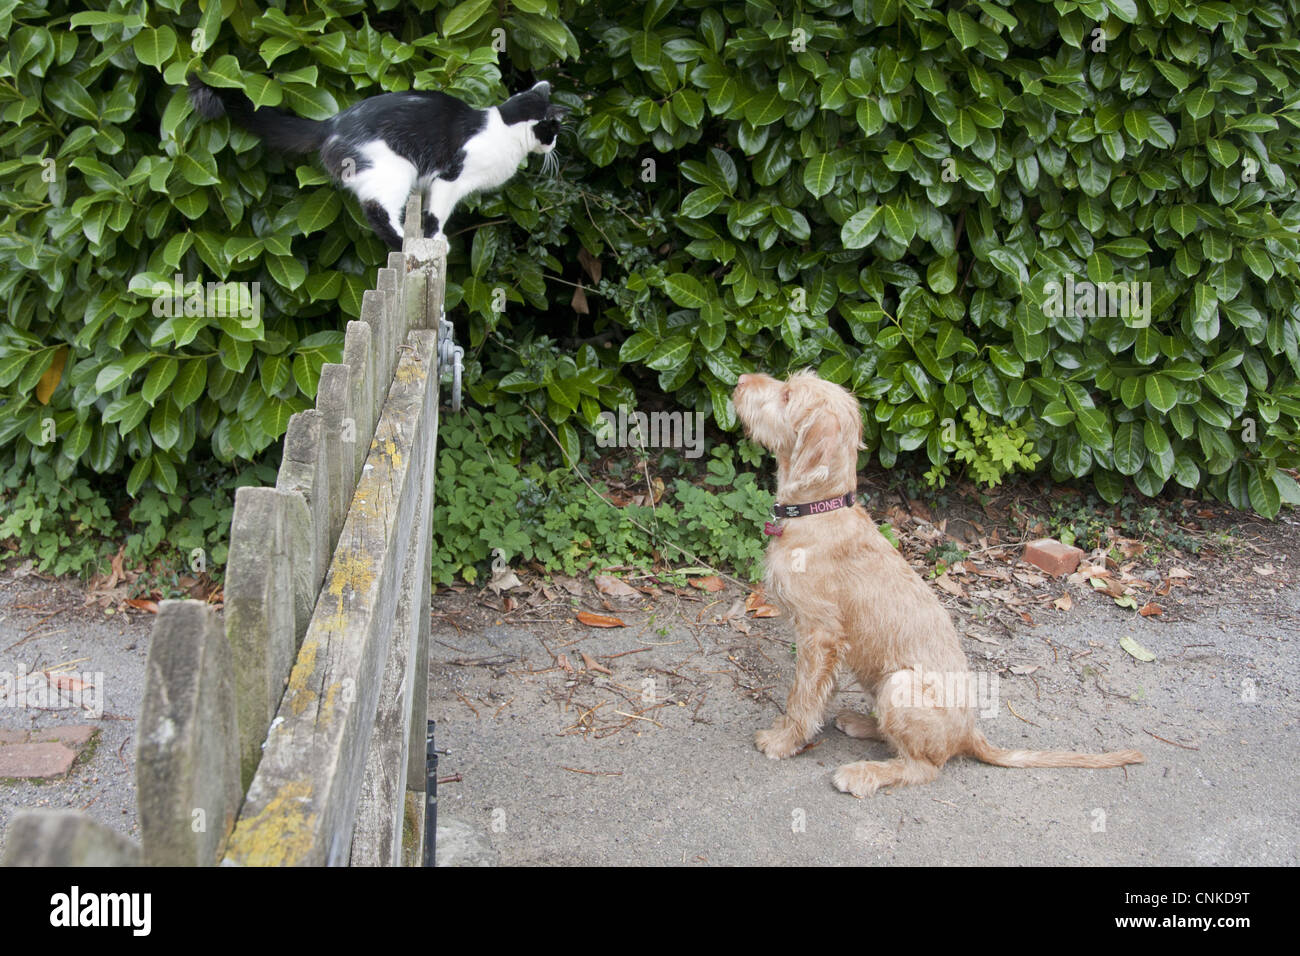 puppy chasing cat